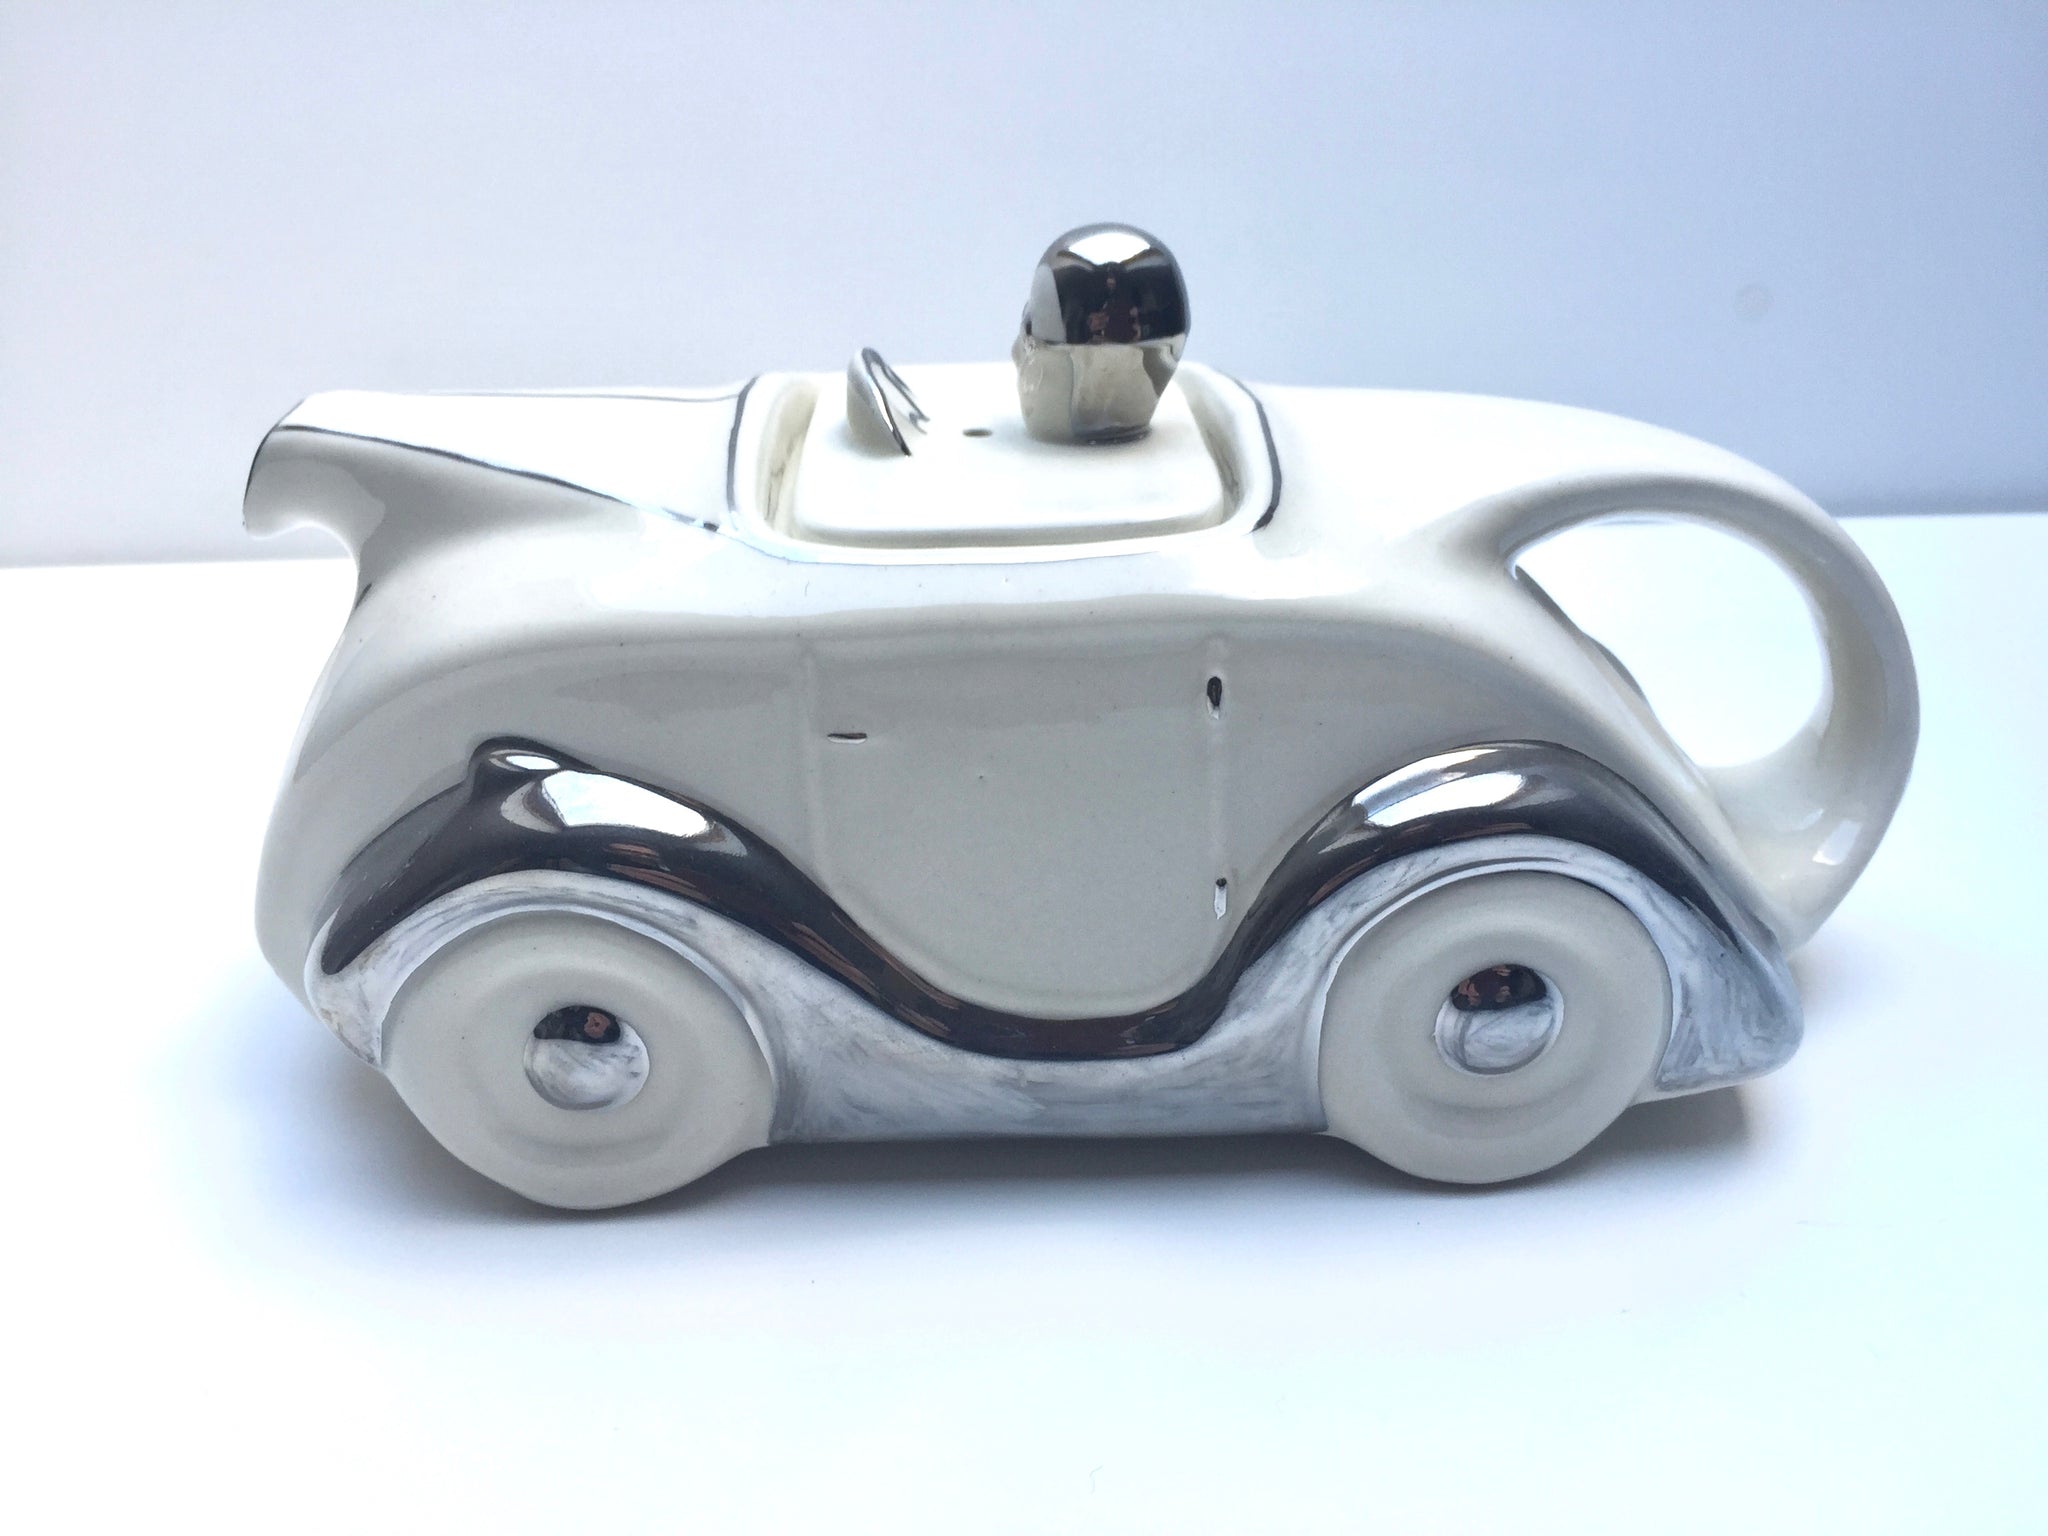 Racing Car Teapot in White colourway from Racing Teapots